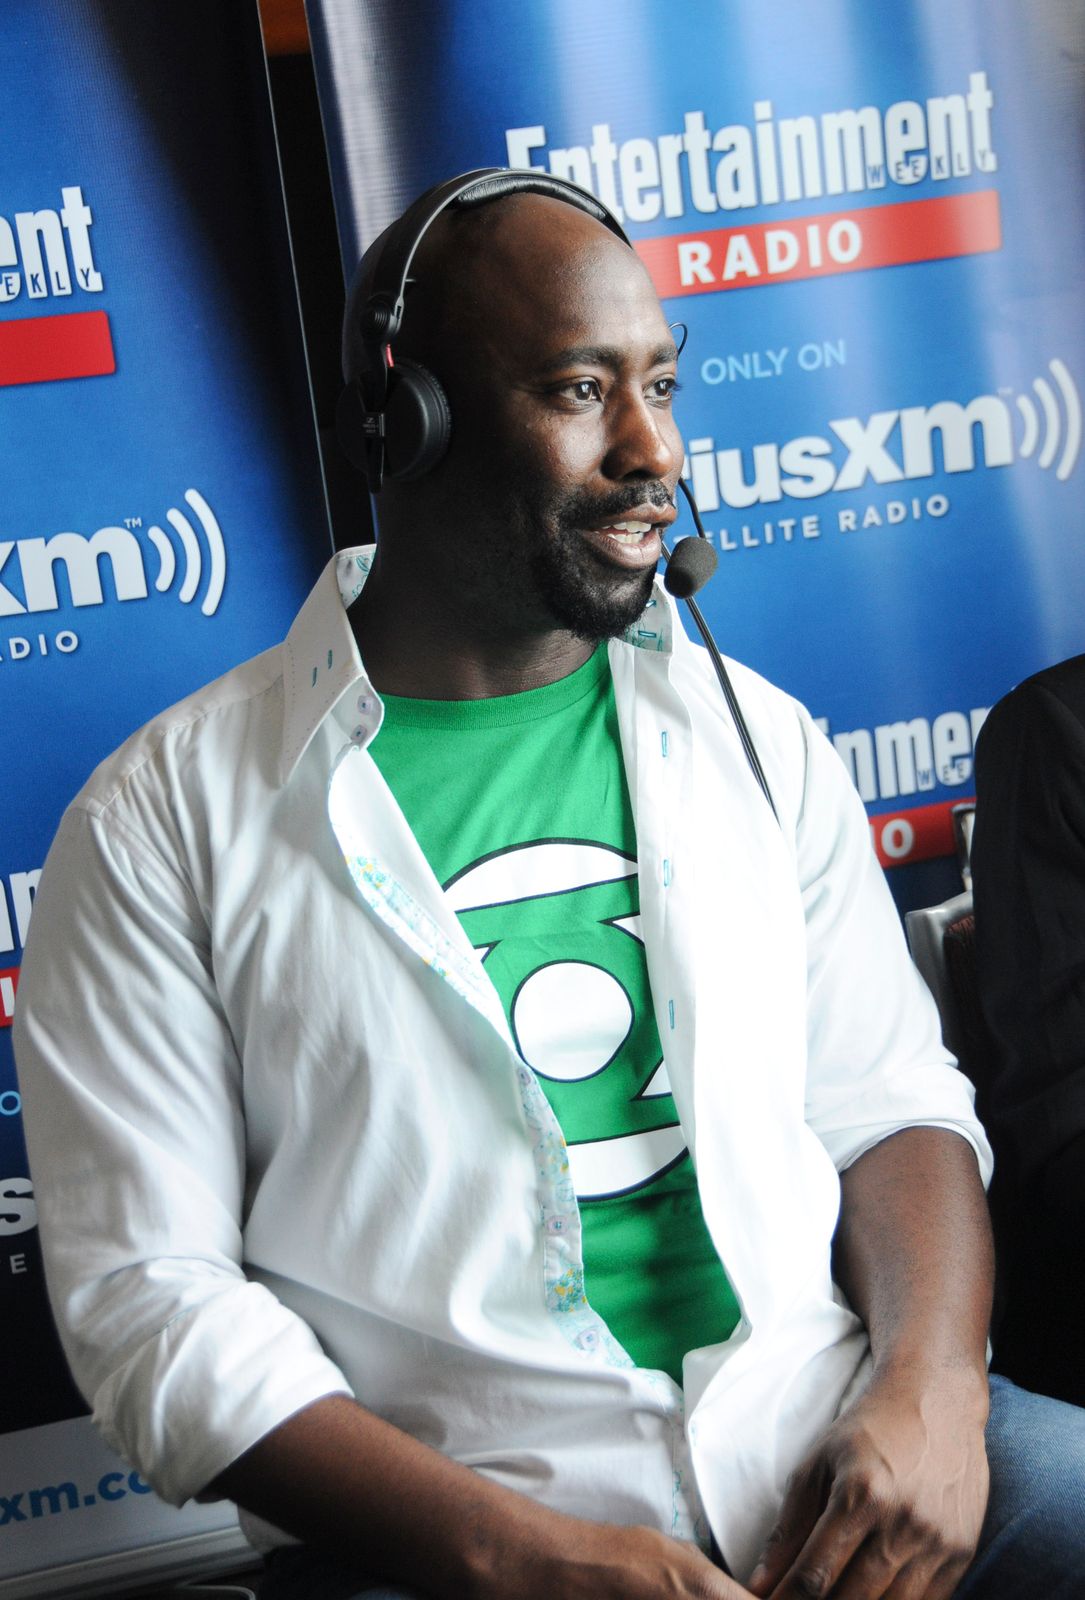  D.B. Woodside at SiriusXM's Entertainment Weekly Radio Channel Broadcasts From Comic-Con 2015 in San Diego on July 10, 2015 | Getty Images